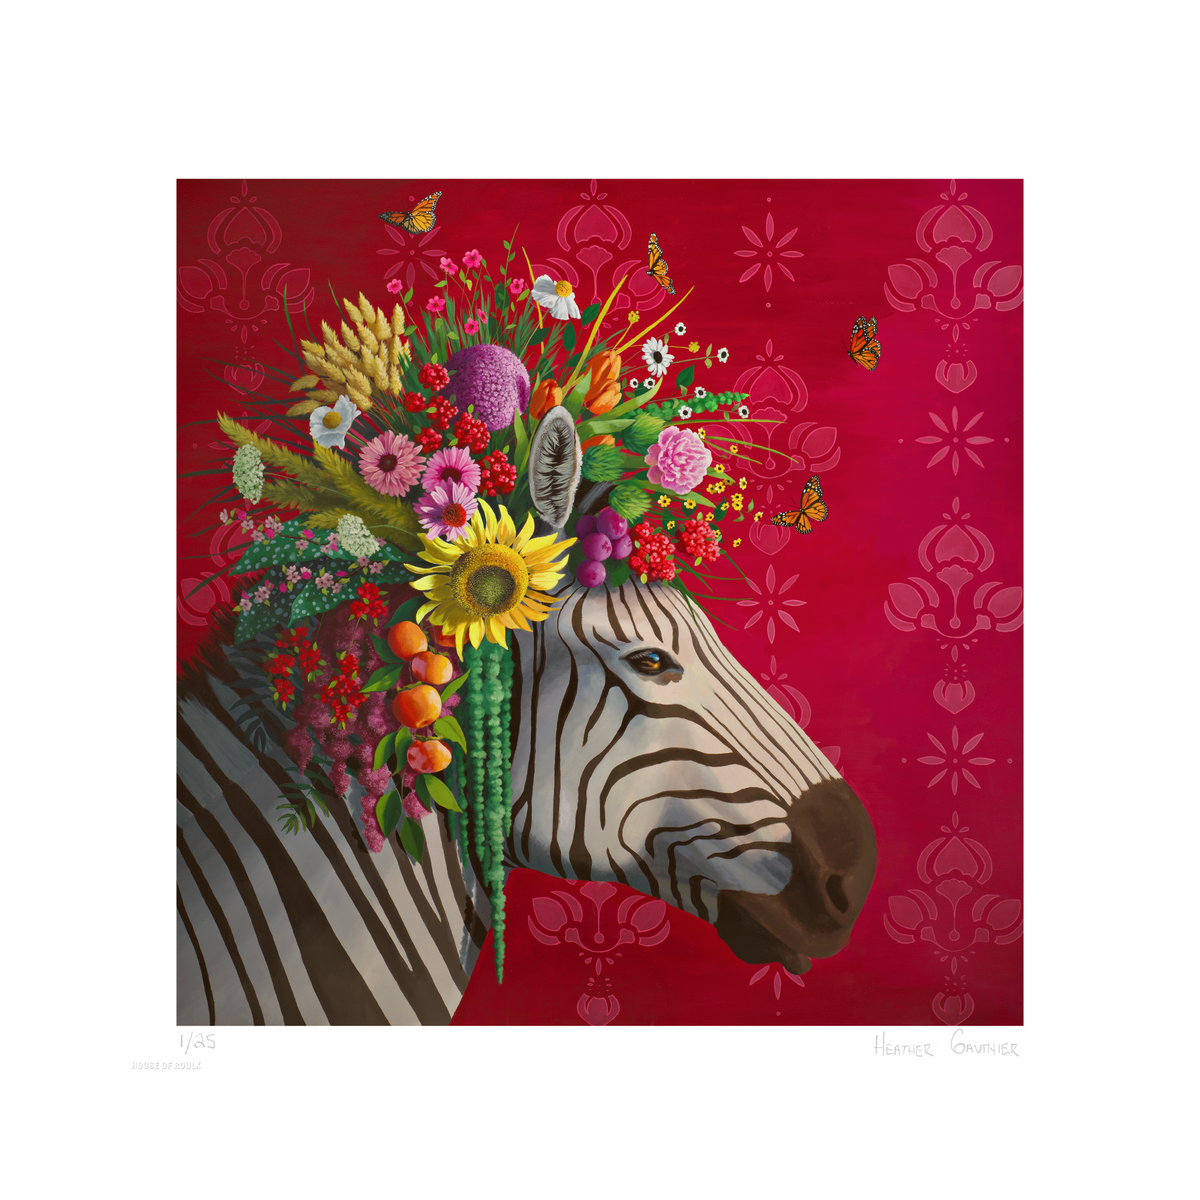 Heather Gauthier &quot;Savanna Blooms&quot; - Archival Print, Limited Edition of 25 - 17 x 17&quot;